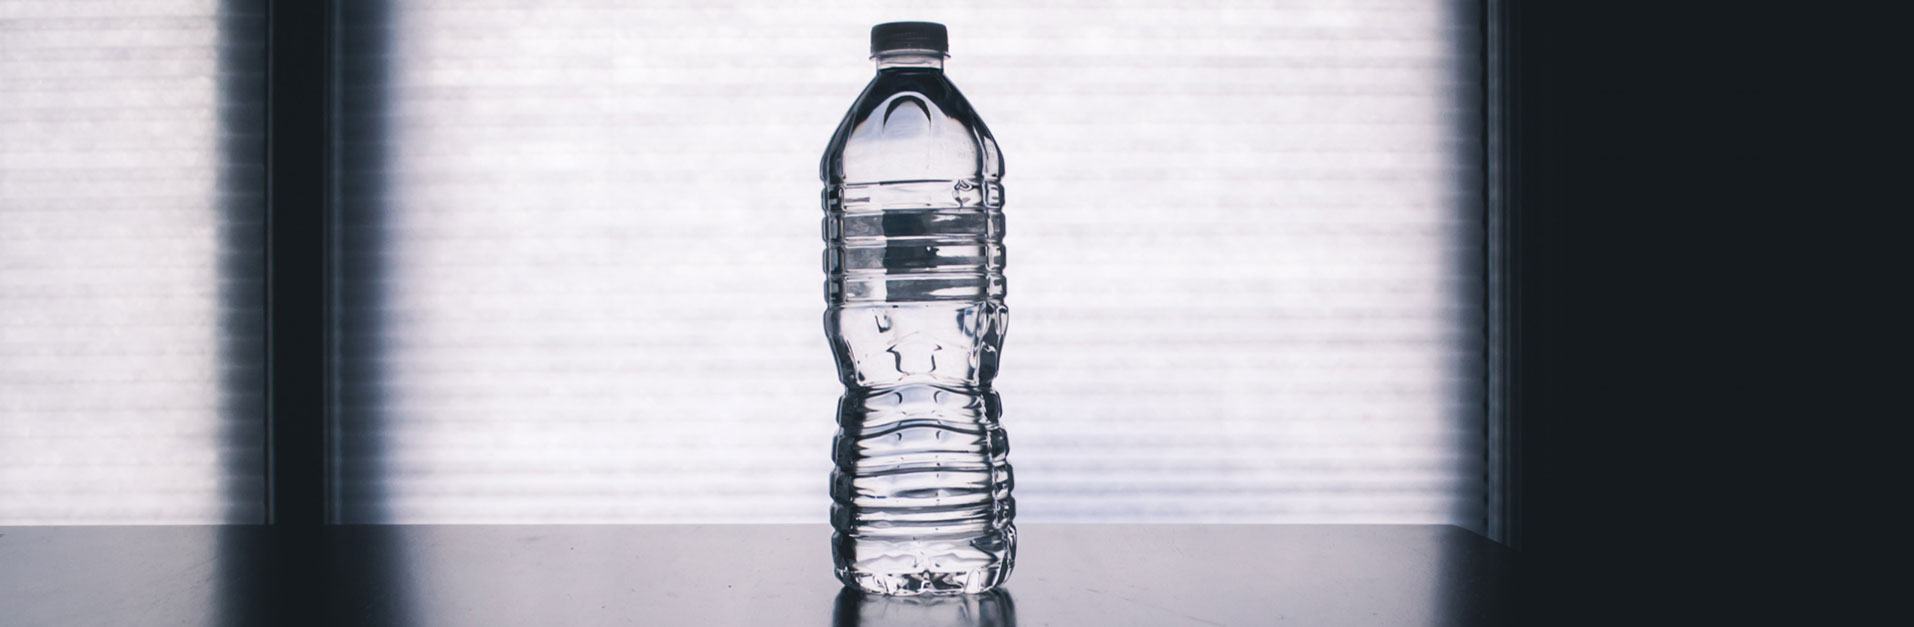 Unhealthy Contaminates in Bottled Water